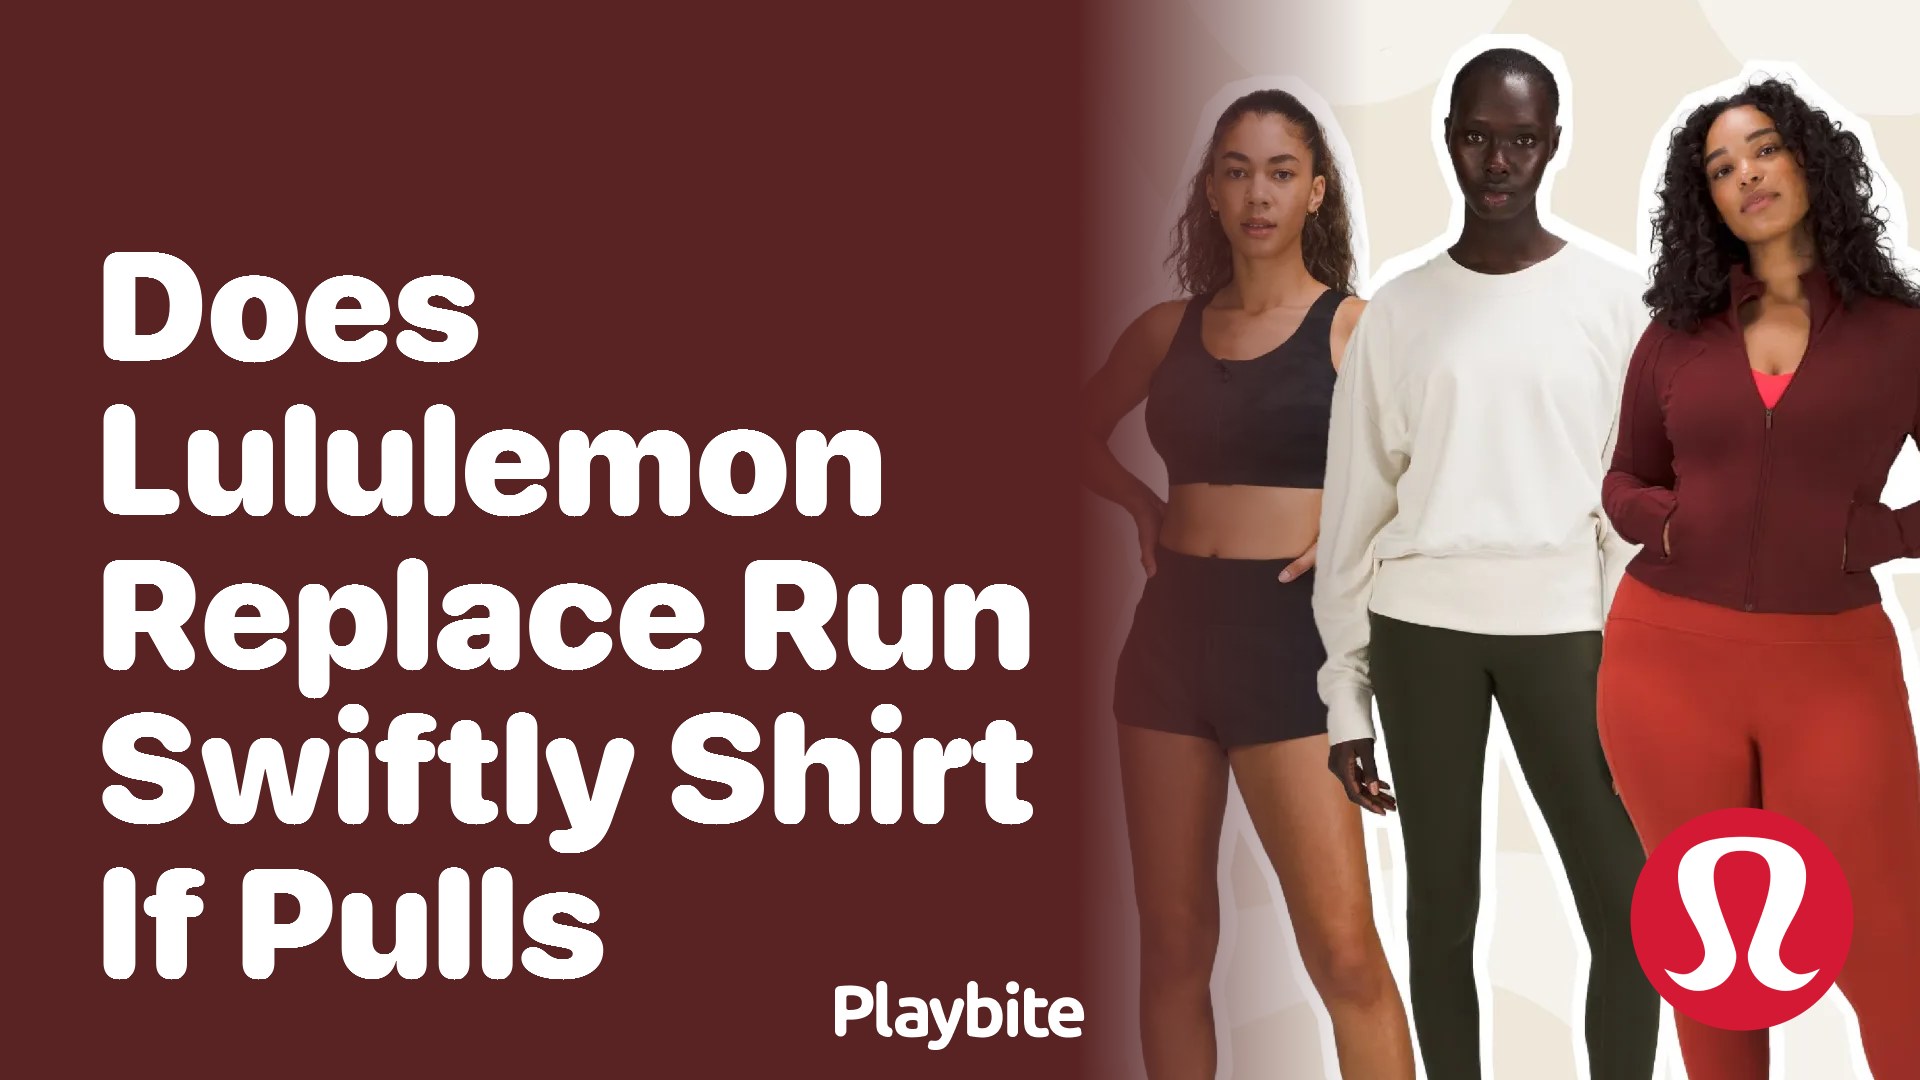 Does Lululemon Replace Run Swiftly Shirts if They Get Pulled